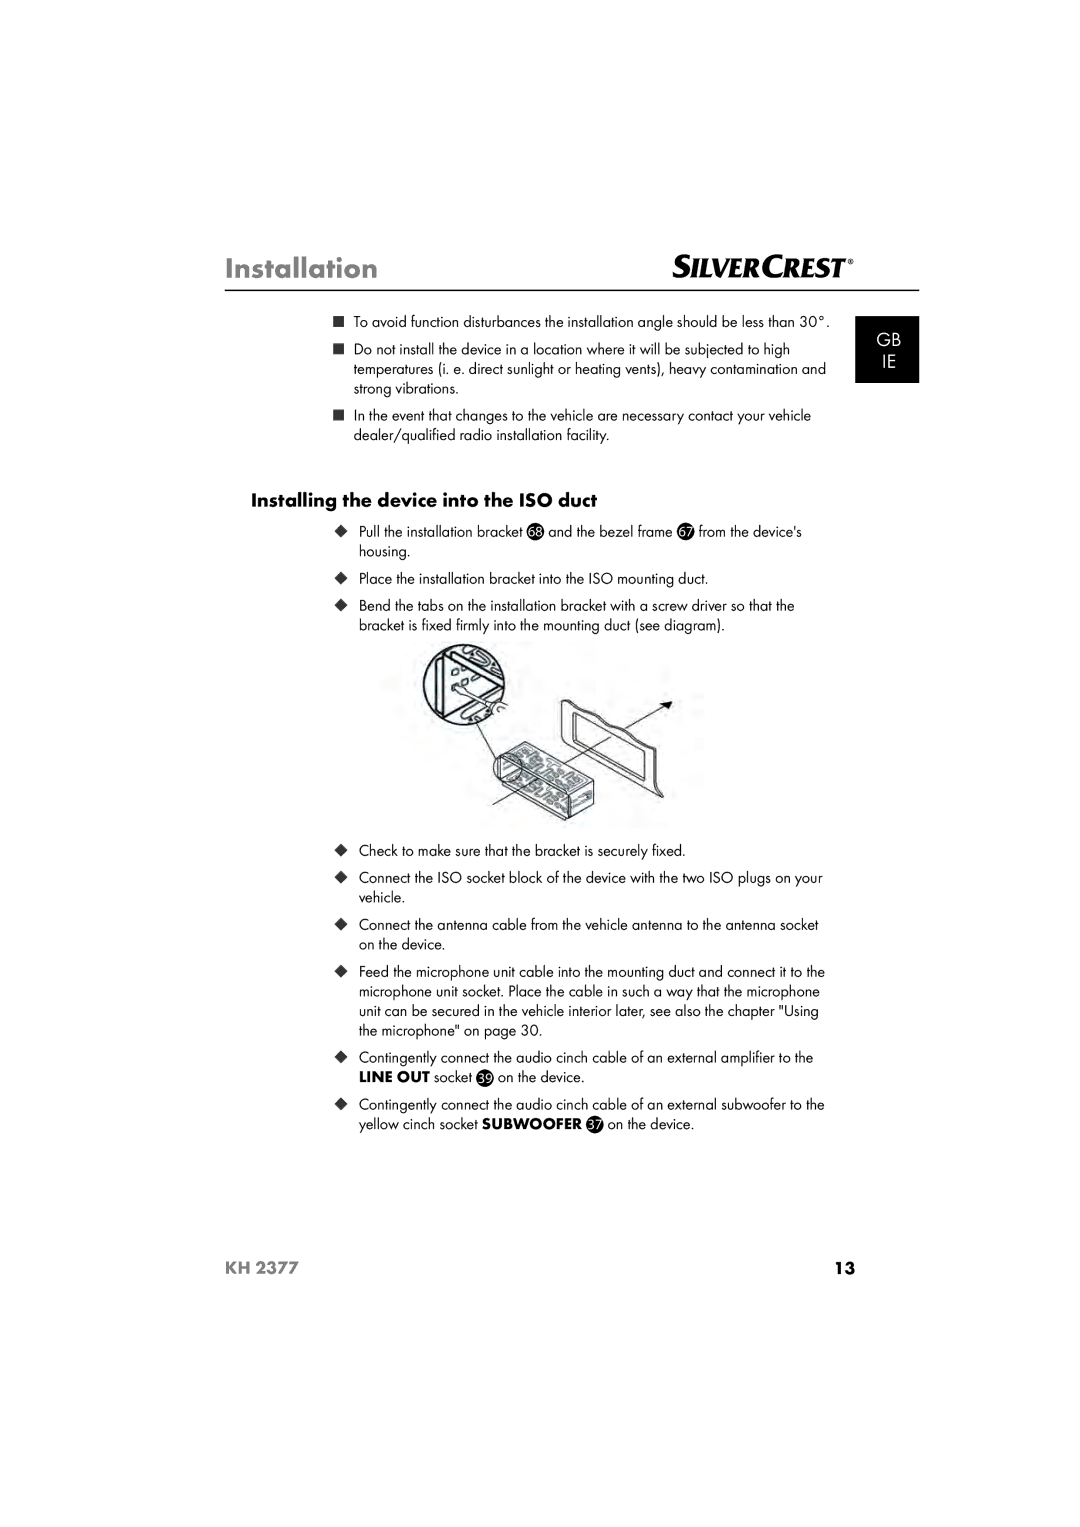 Silvercrest KH 2377 operating instructions Installing the device into the ISO duct 